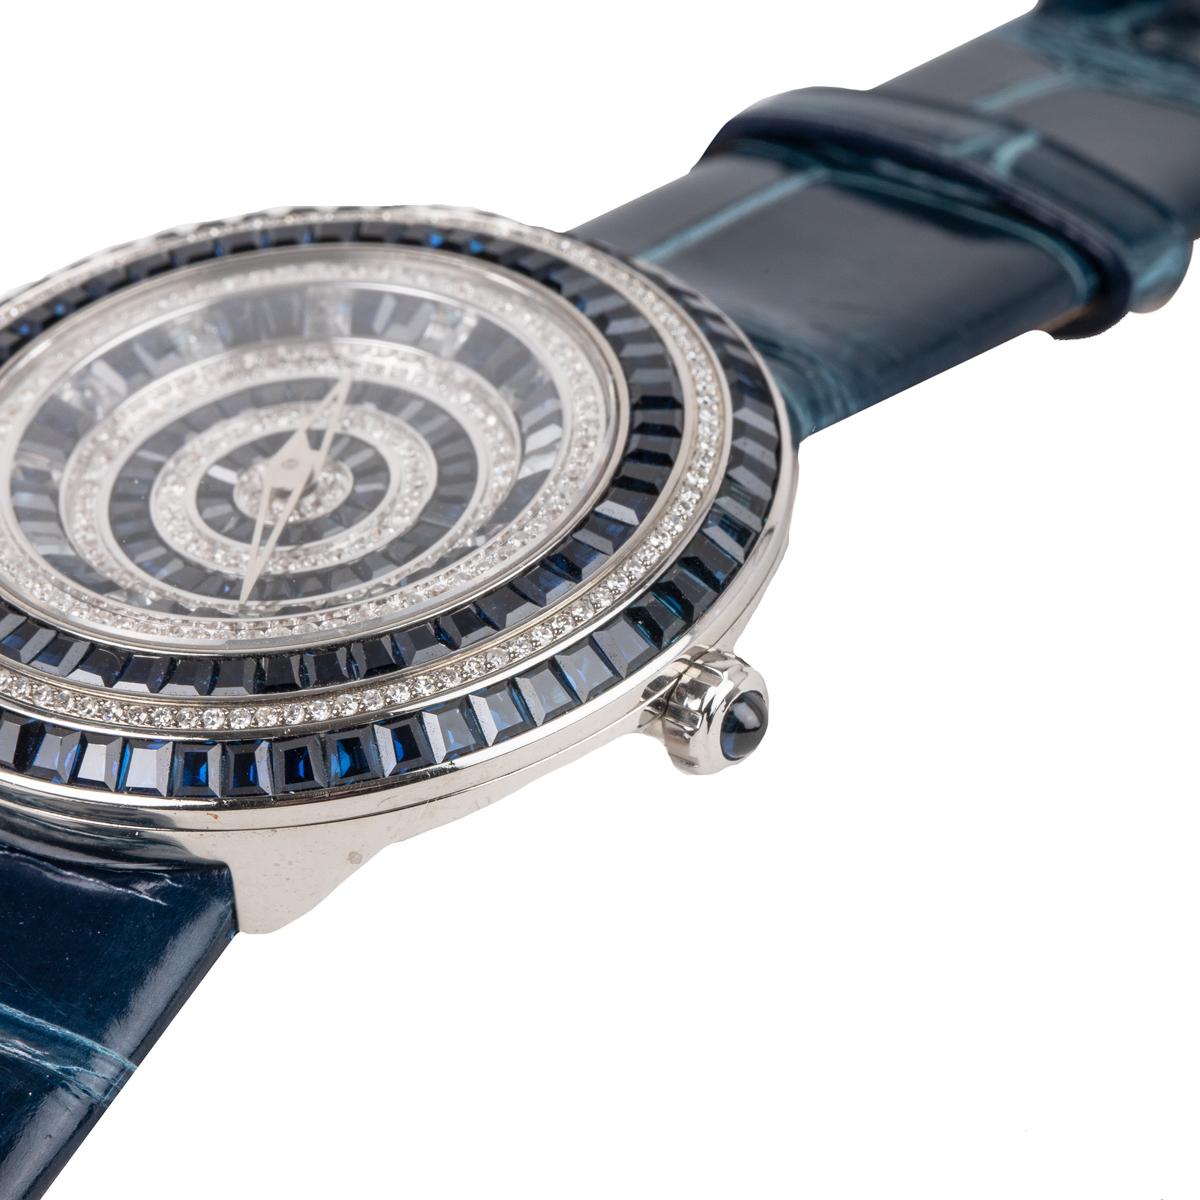 This watch features blue sapphires in baguette shape and diamonds embedded on the face of the watch. This watch features automatic movement and is made with stainless steel and fine leather.